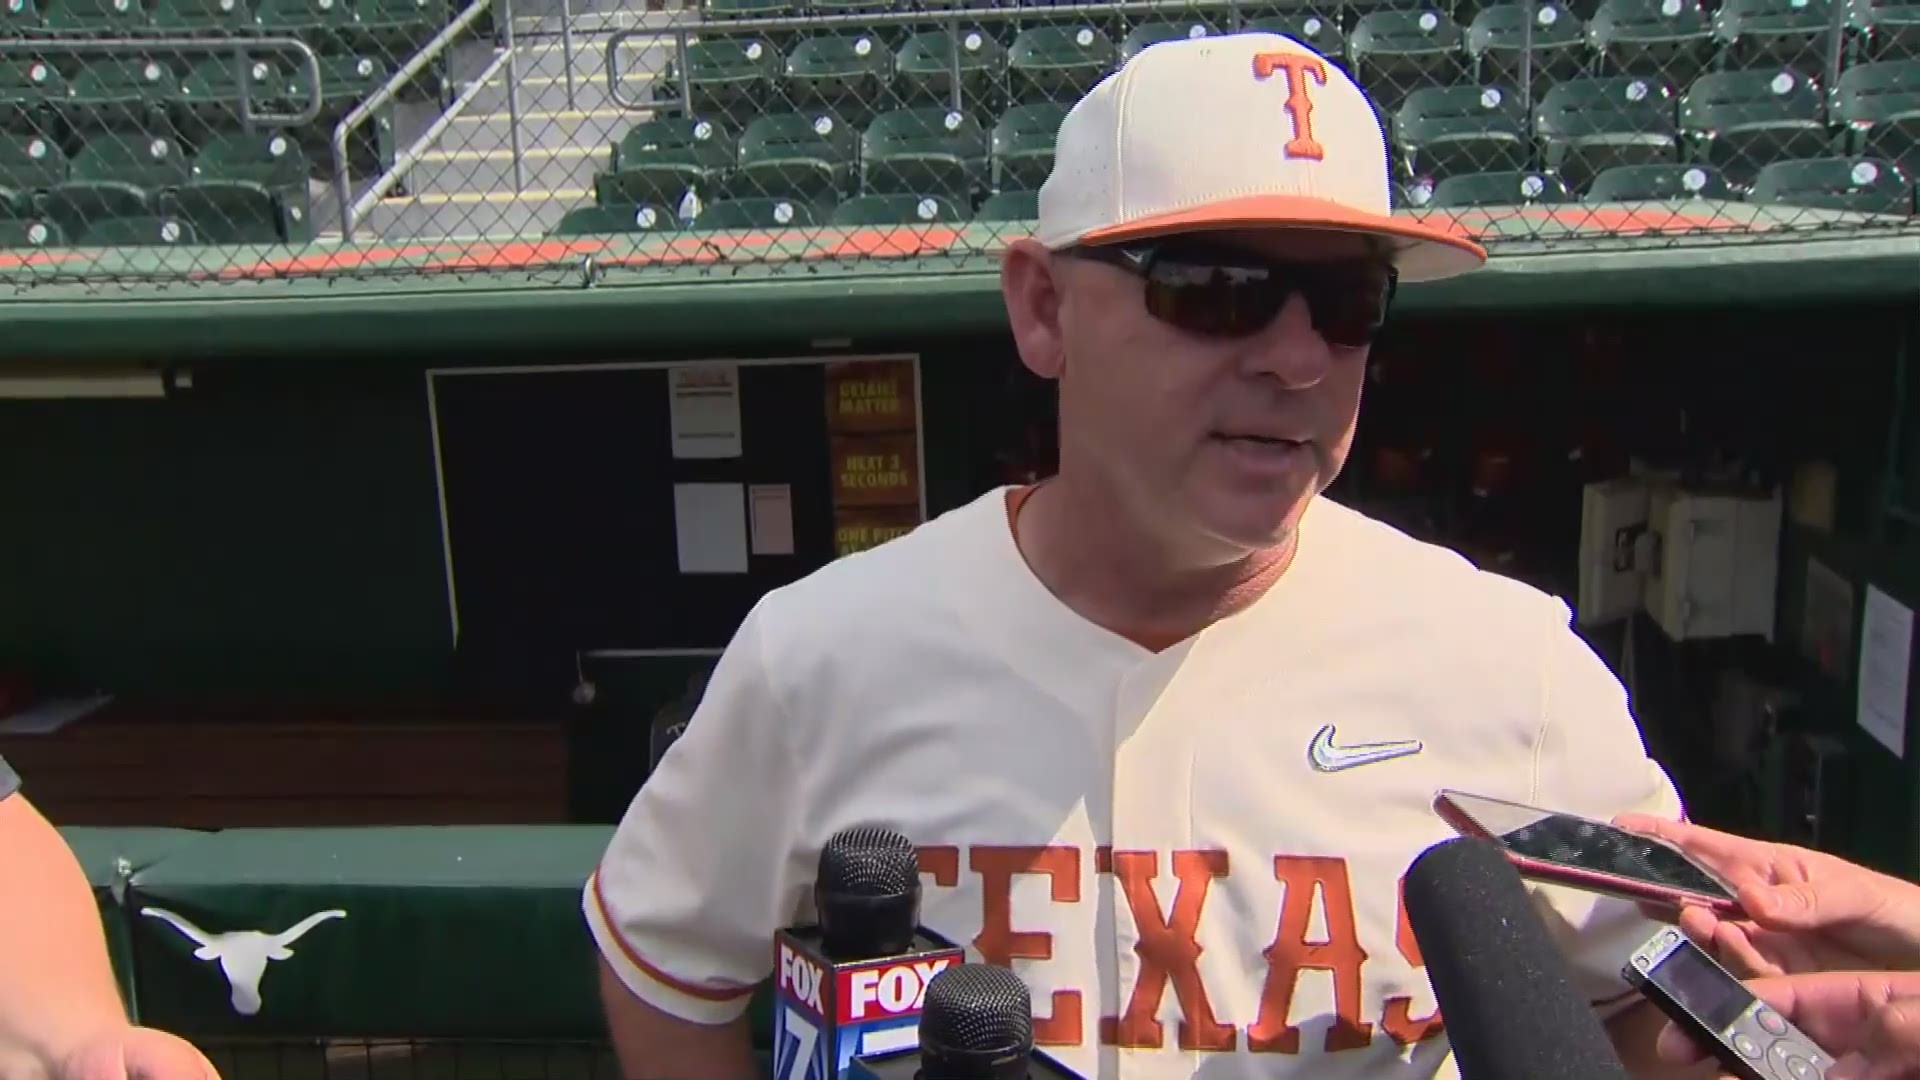 The Longhorns' 13-0 loss Friday afternoon eliminated Texas from the Big 12 Tournament race.